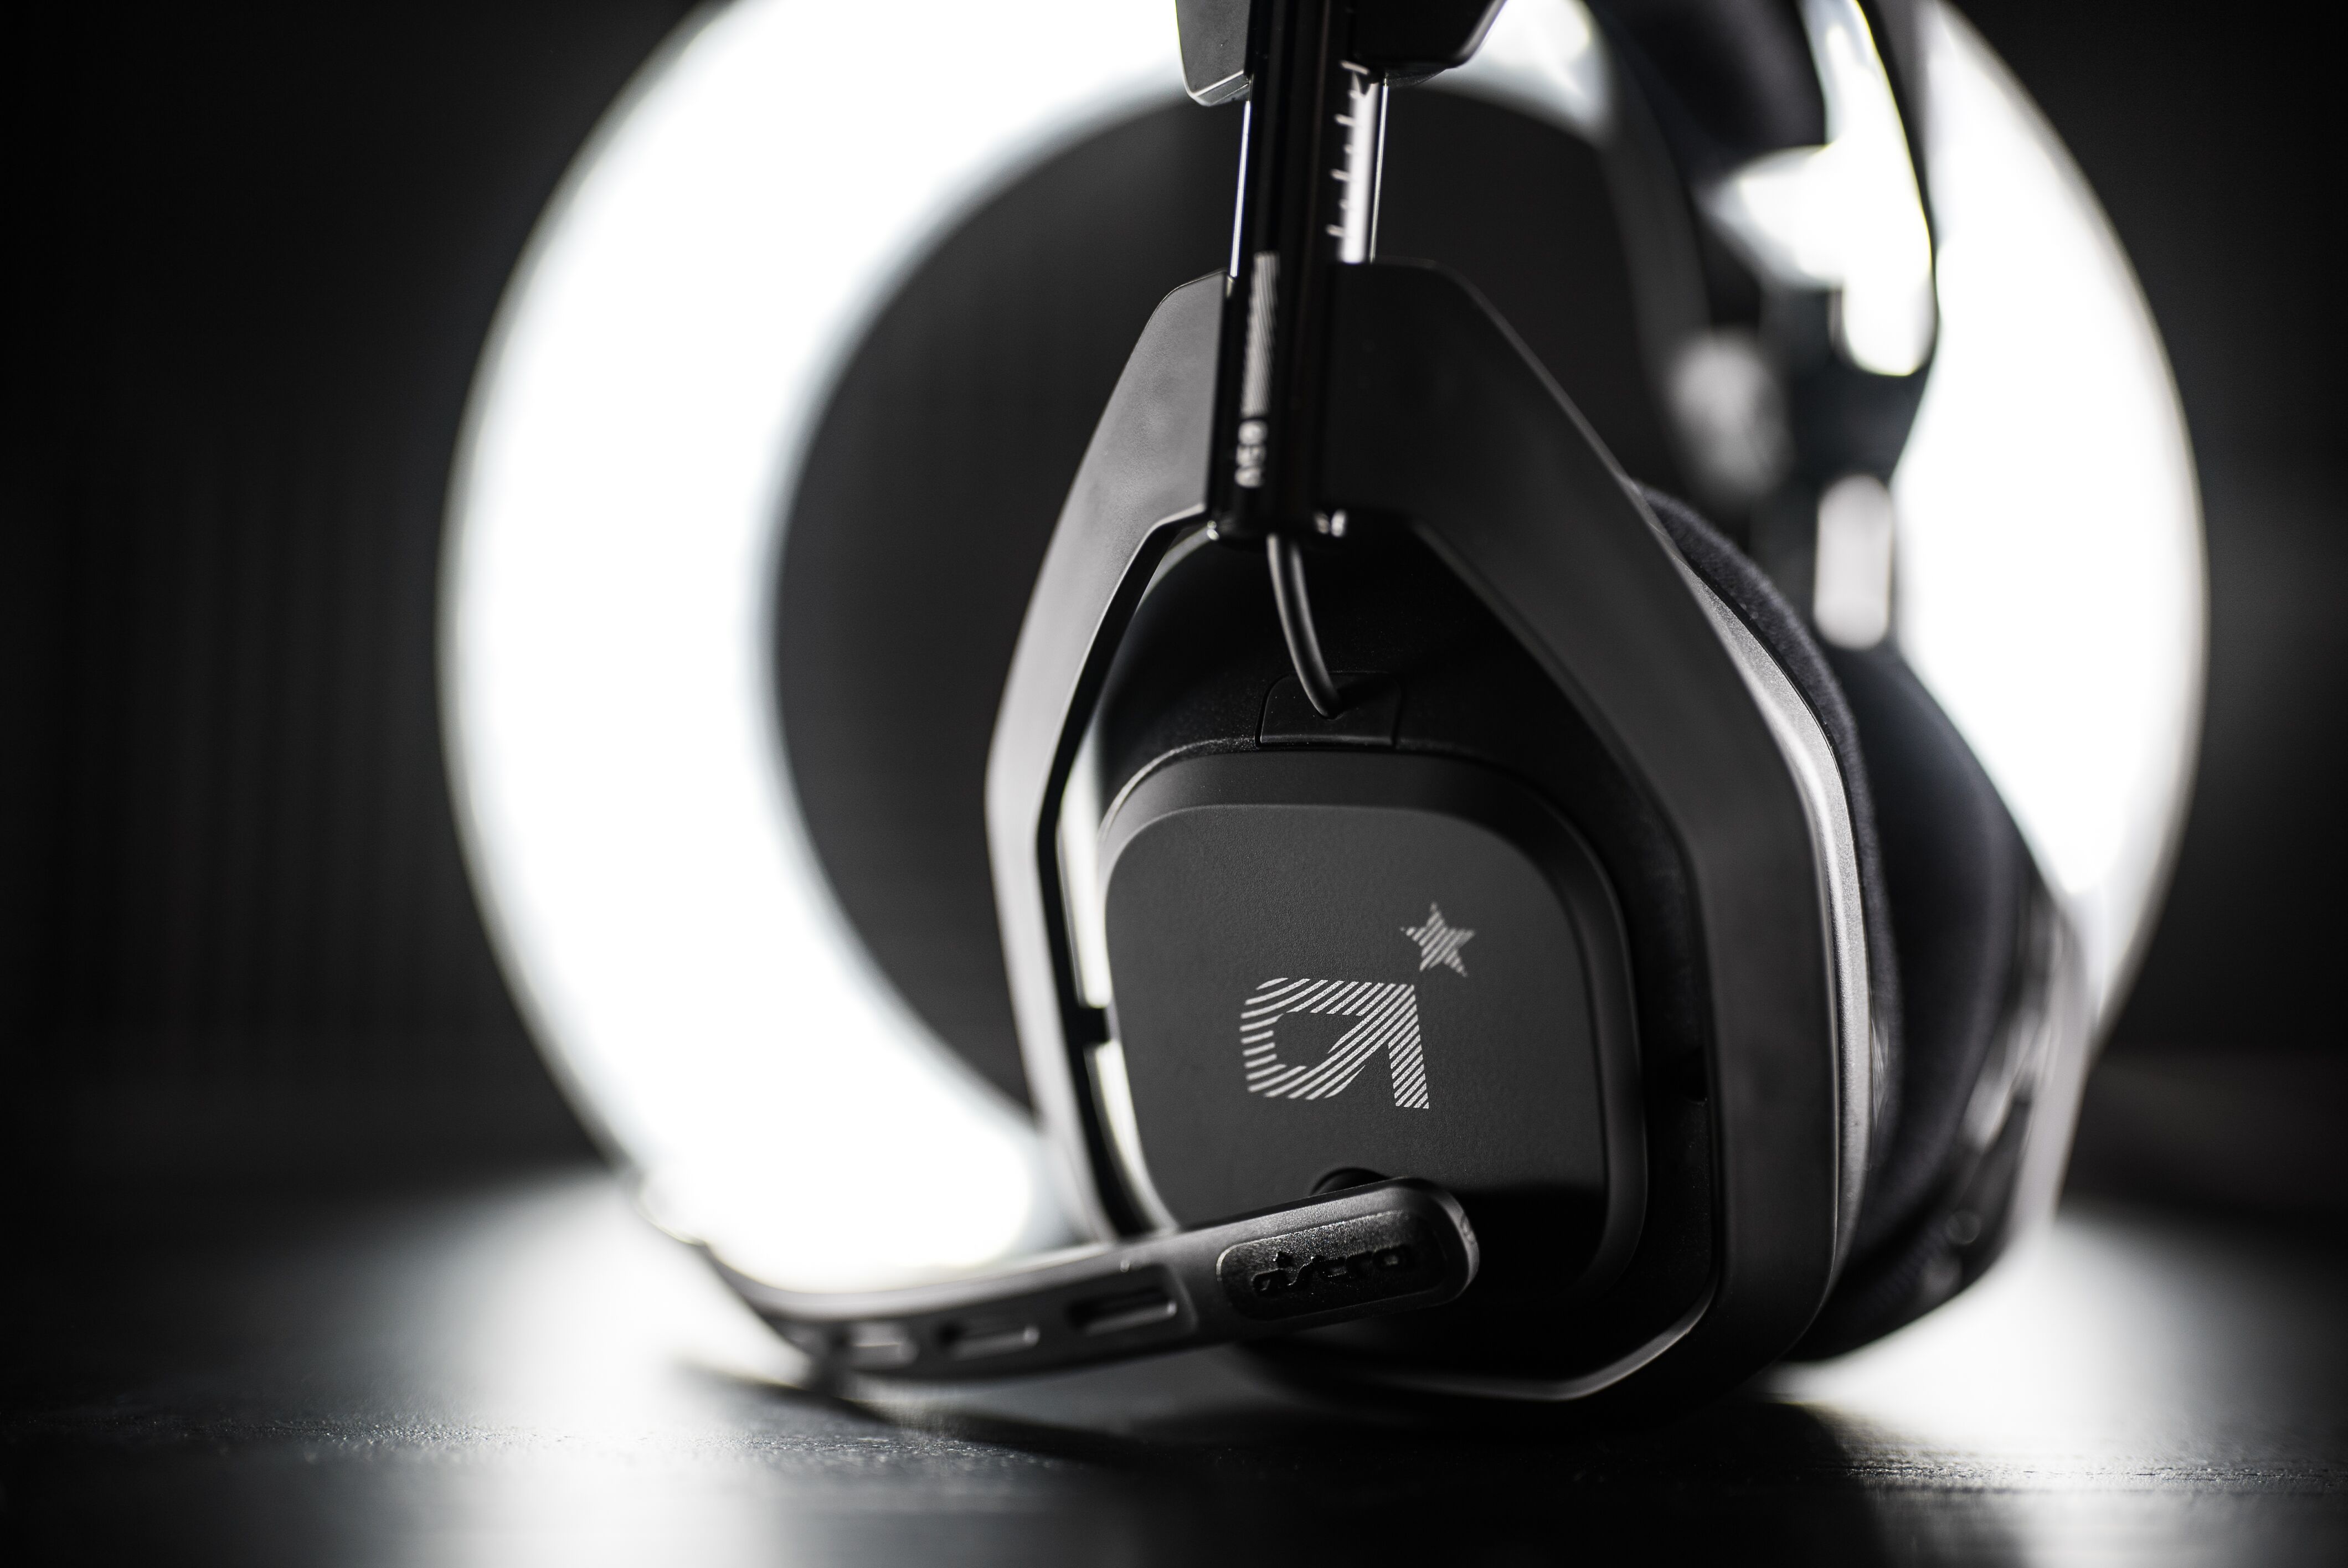 Oceaan altijd Monet The New 4th Gen Astro A50 Headset Refines an Already Great Product